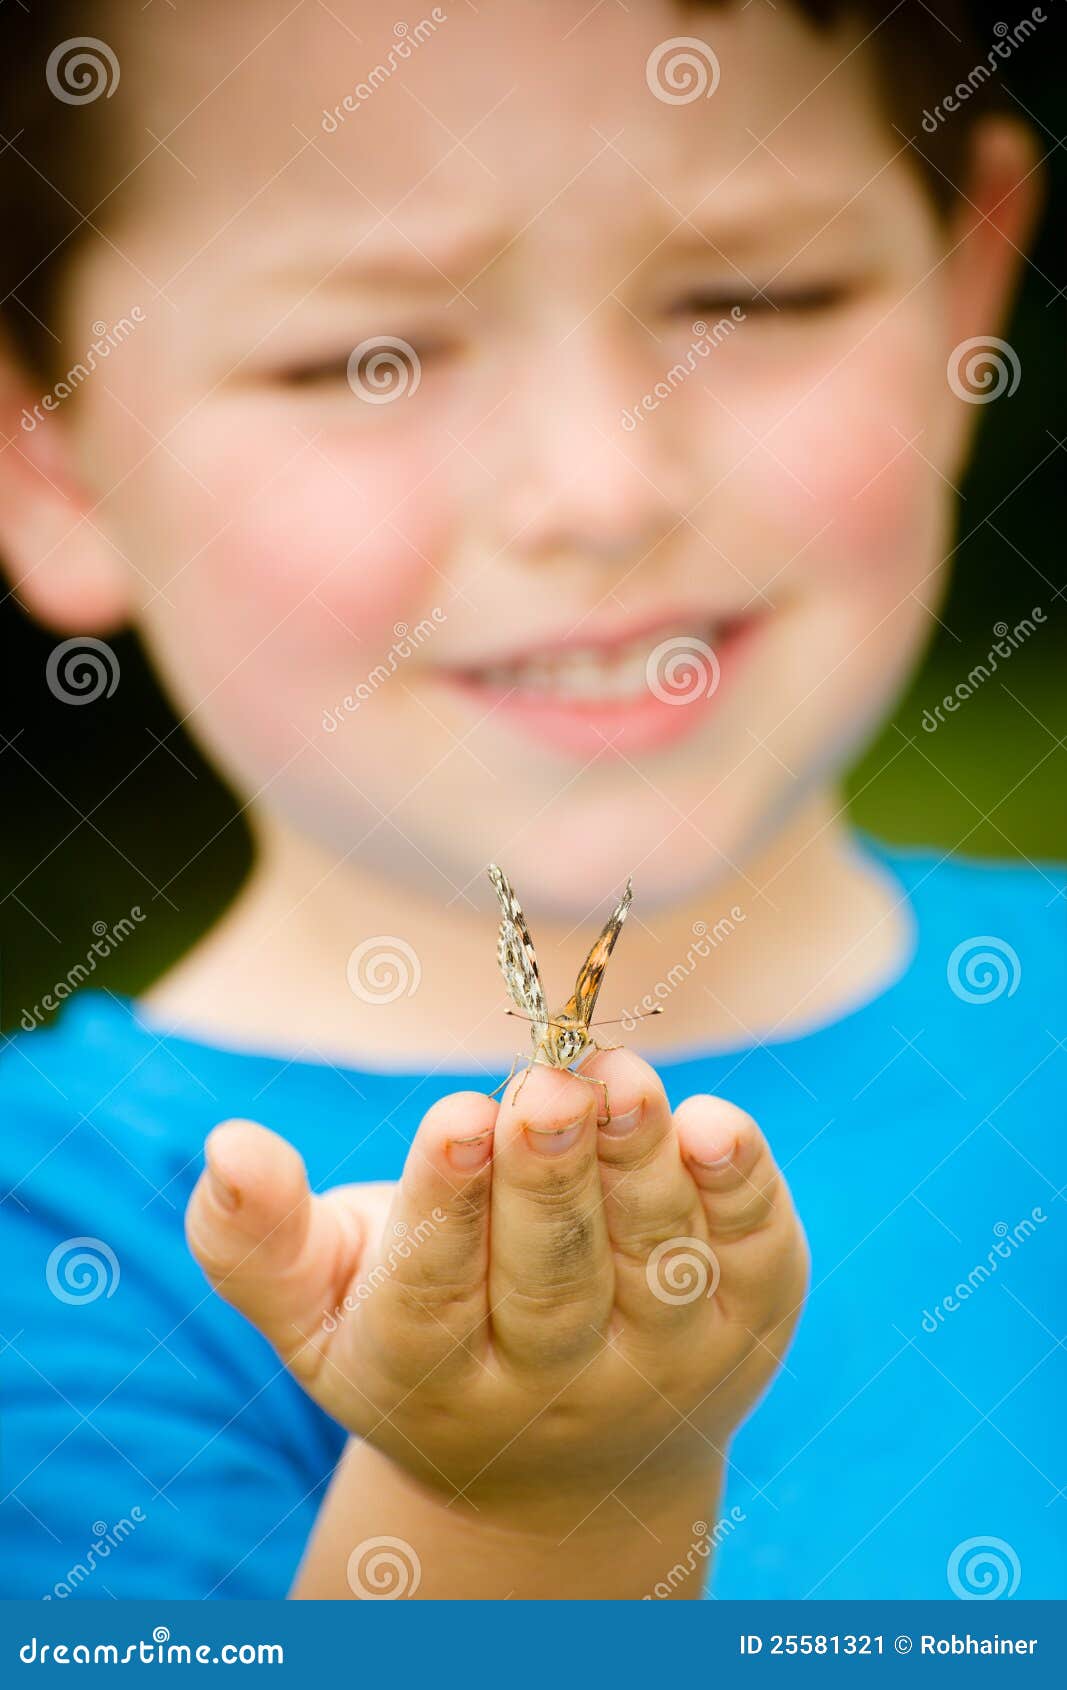 Child holding butterfly. Spring concept with close up of a painted lady butterfly, Vanessa cardui, being held by child playing outdoors in nature